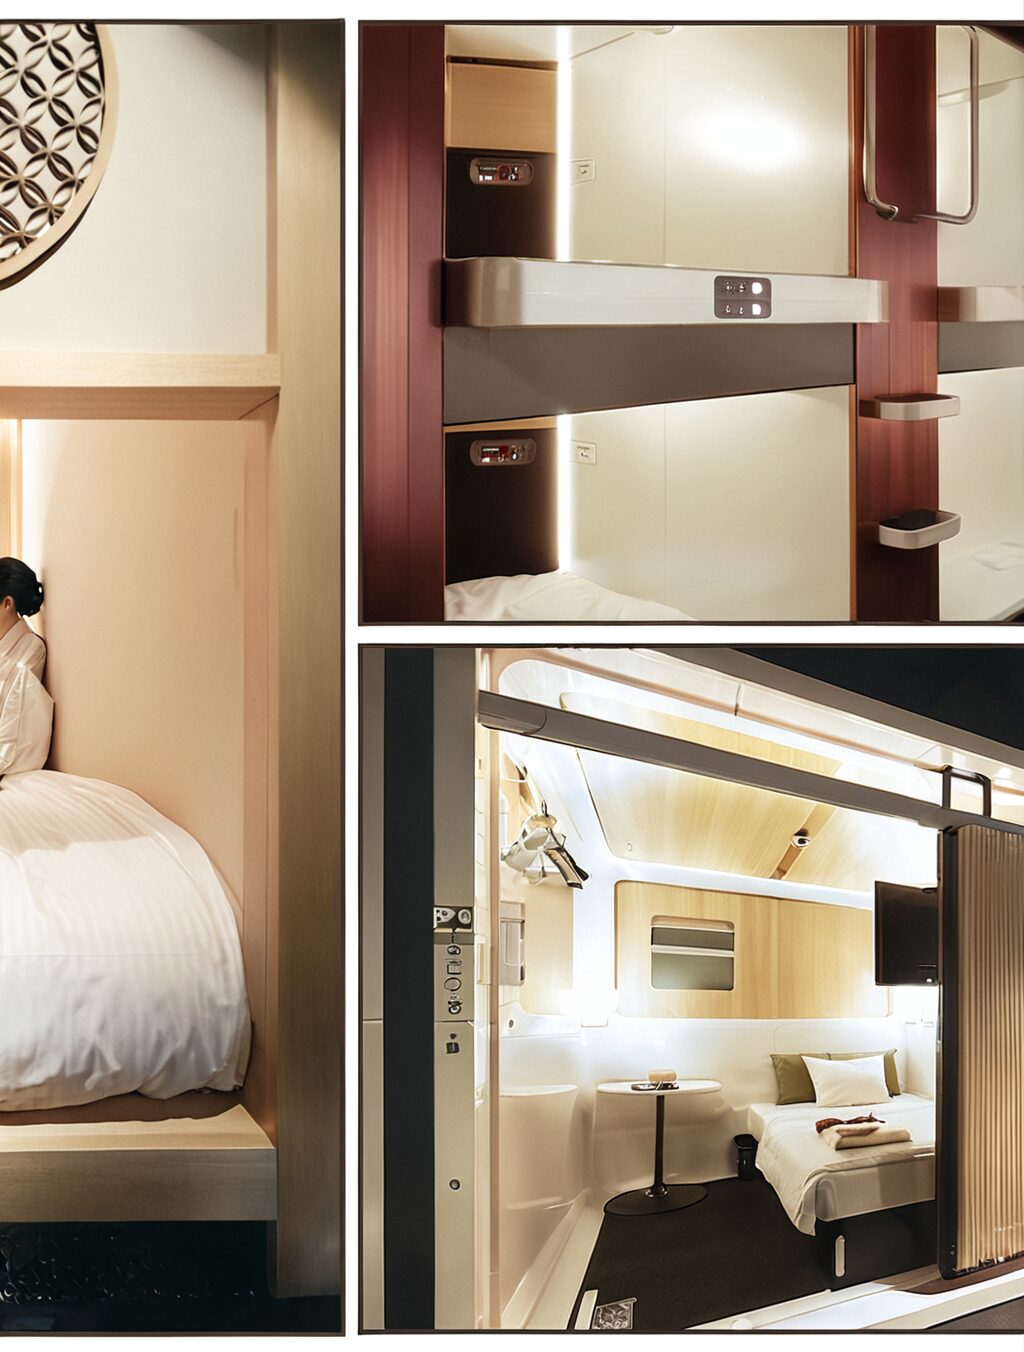 are capsule hotels expensive in japan